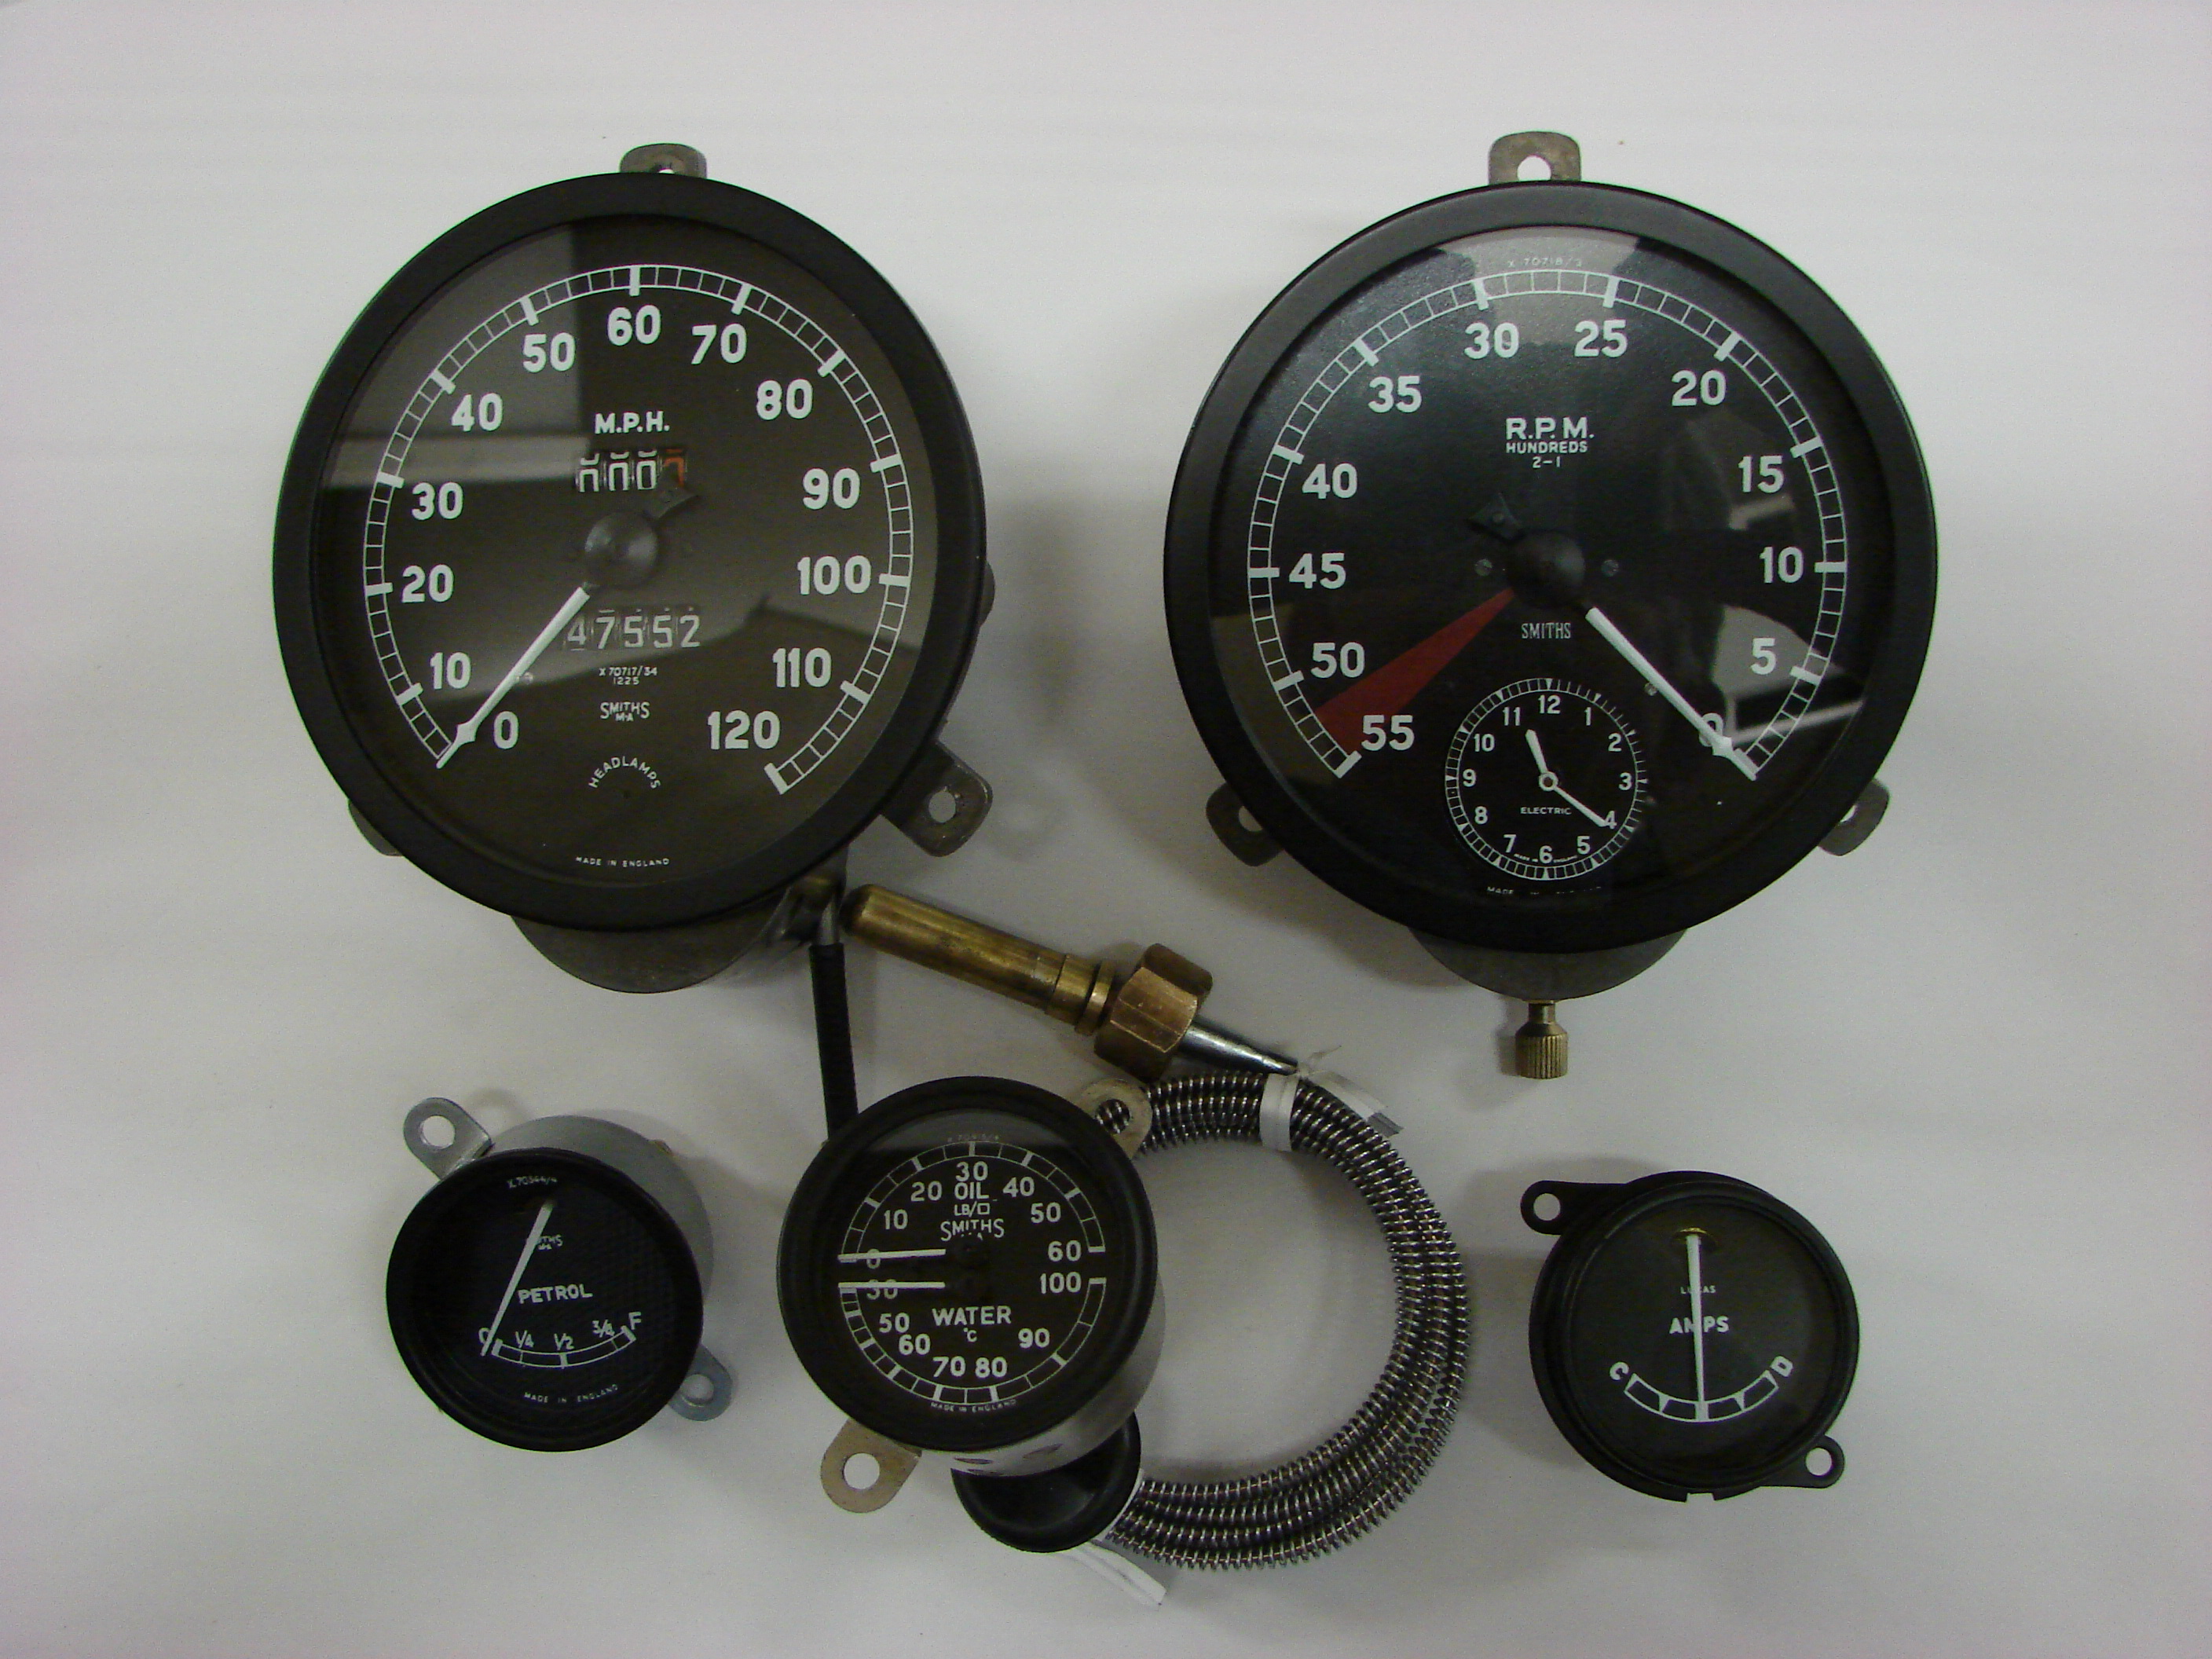 Black speedometers and other devices with wires